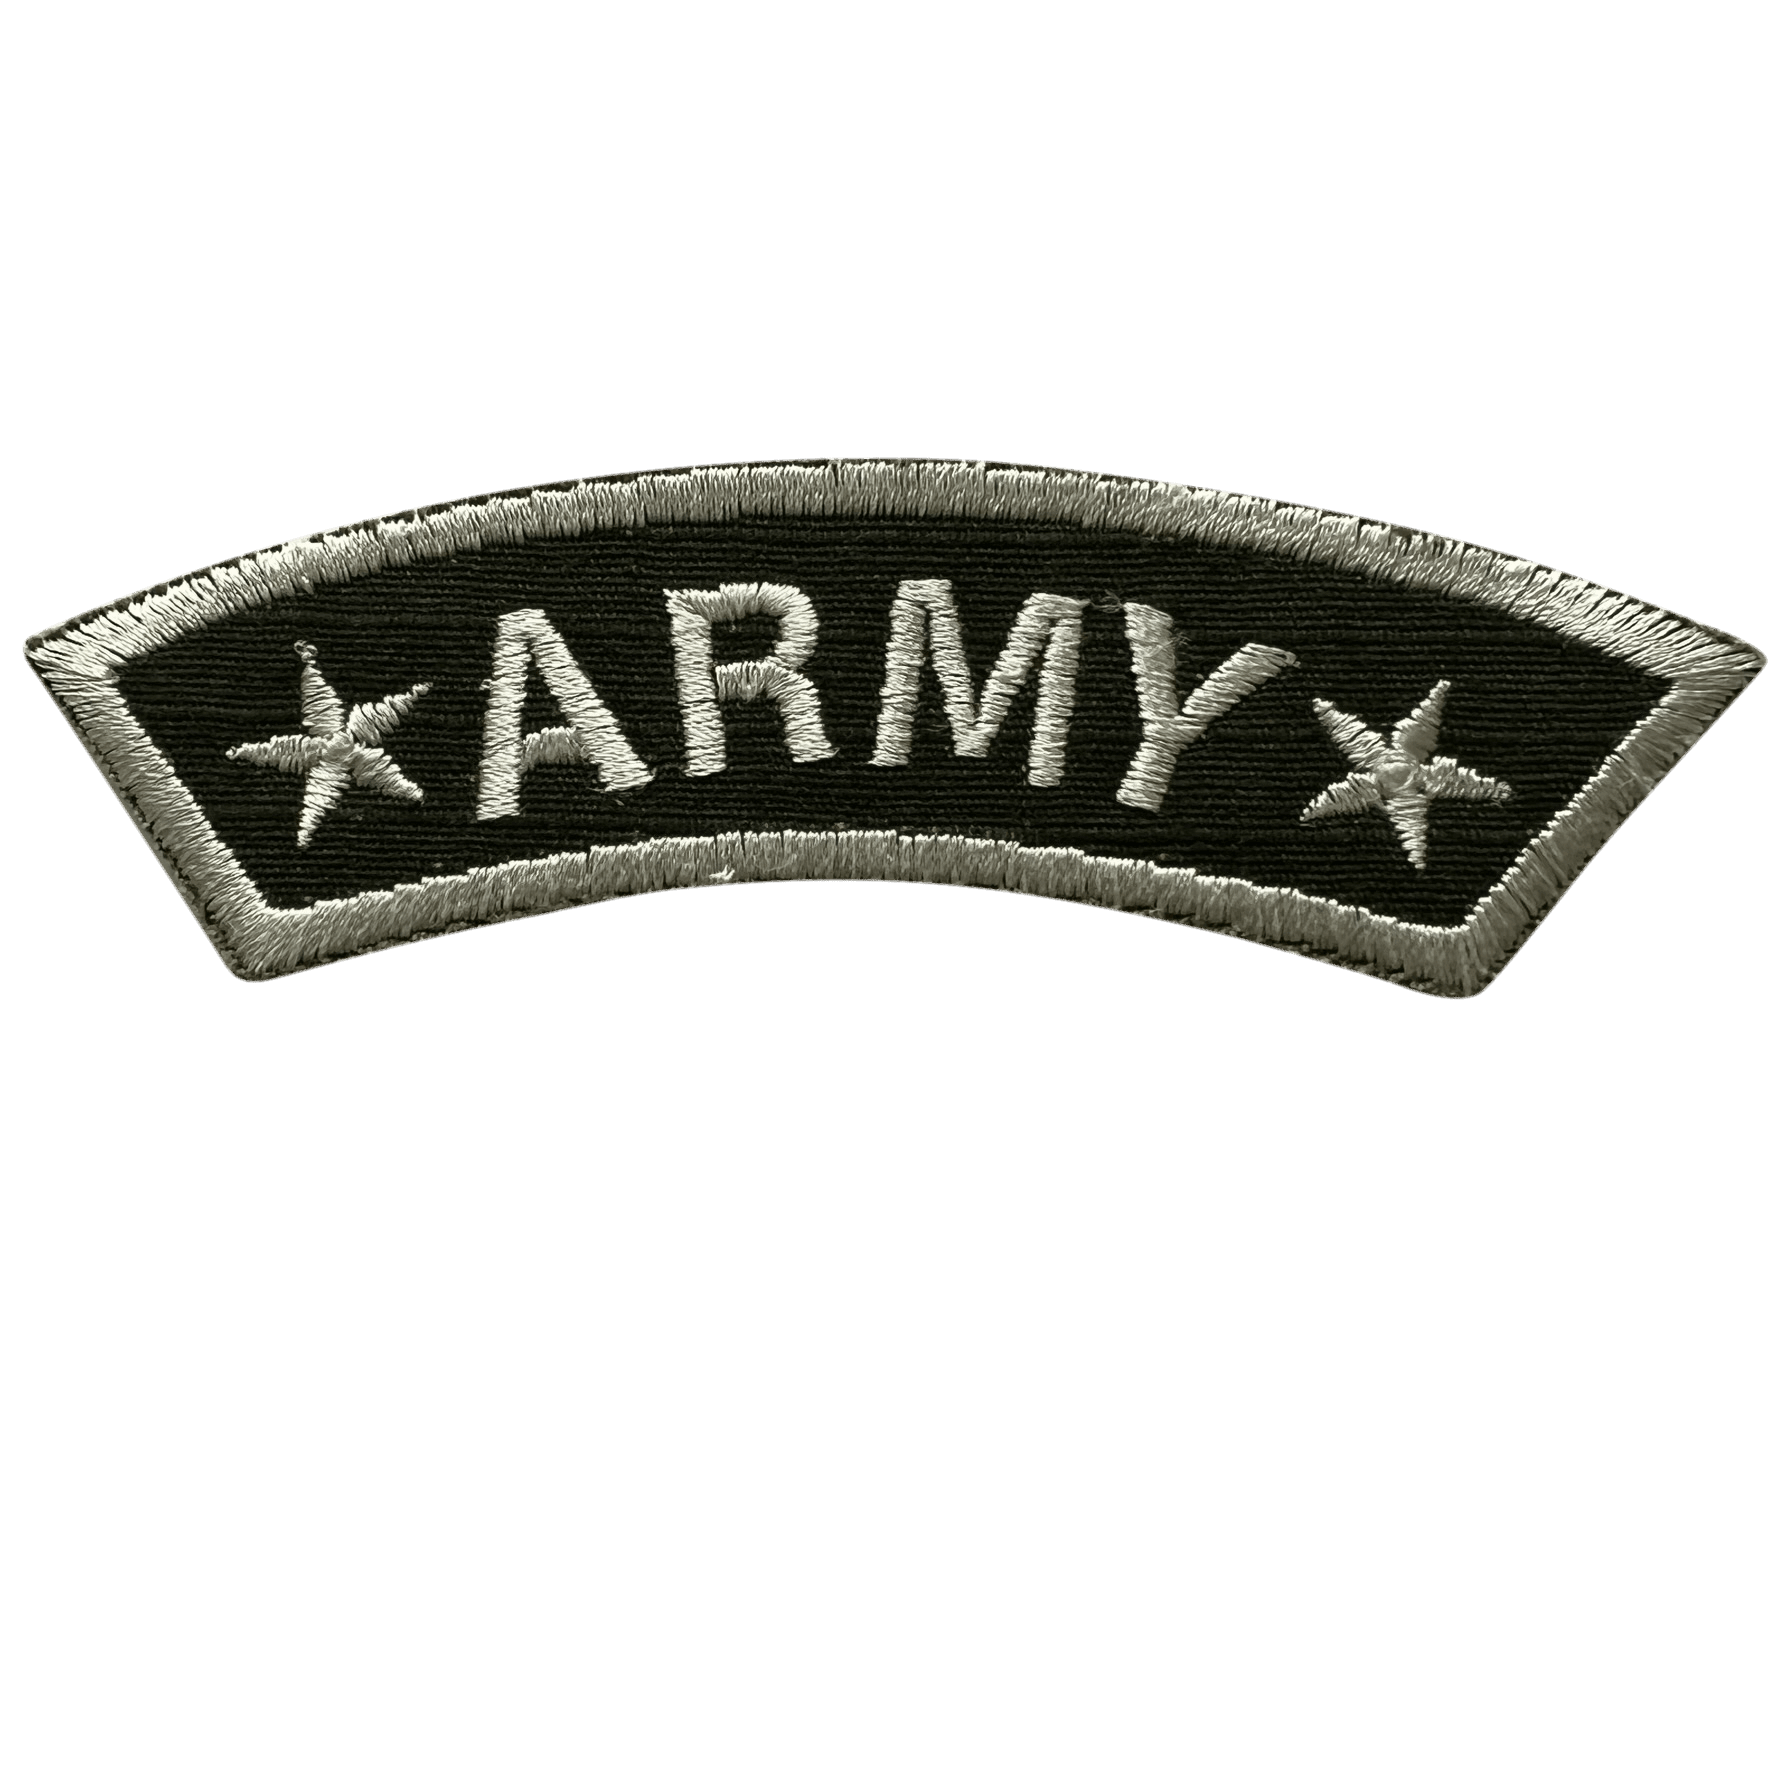 ARMY Patch Iron Sew On US Military Uniform Fancy Dress Applique Embroidery Badge